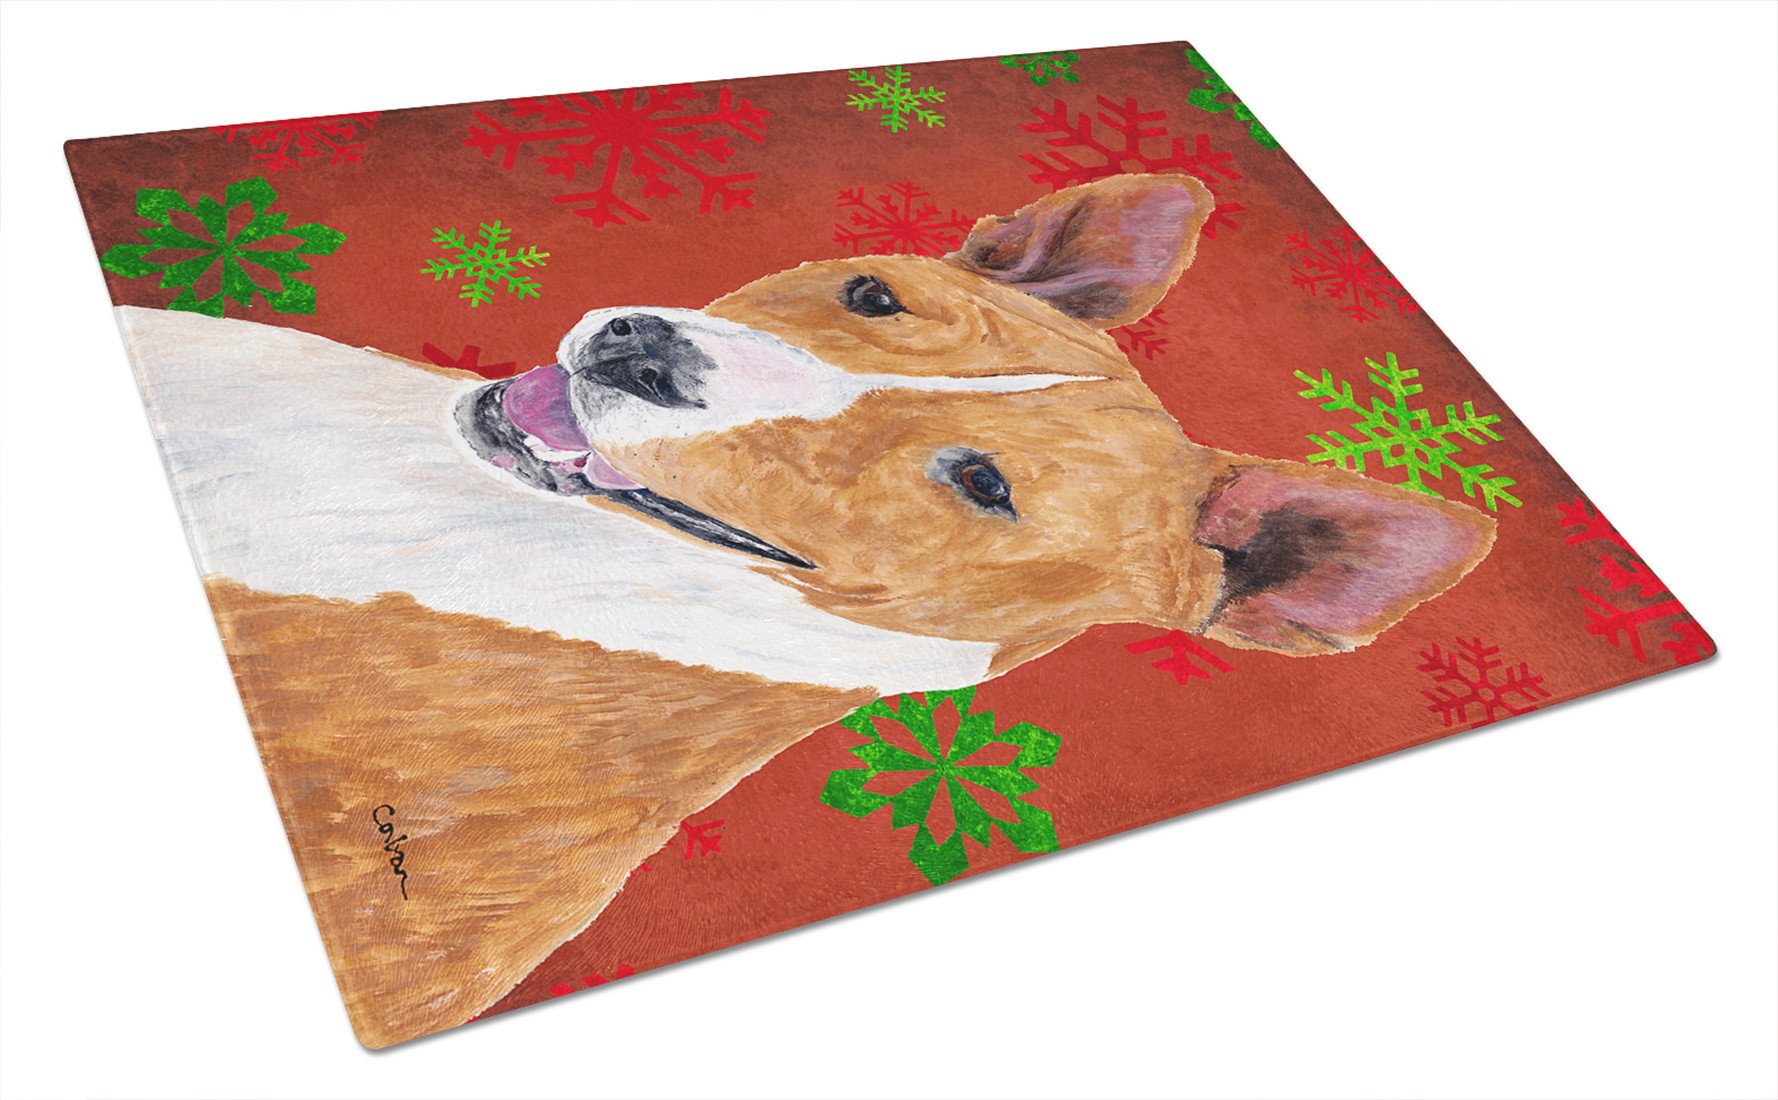 Basenji Red and Green Snowflakes Holiday Christmas Glass Cutting Board Large by Caroline's Treasures